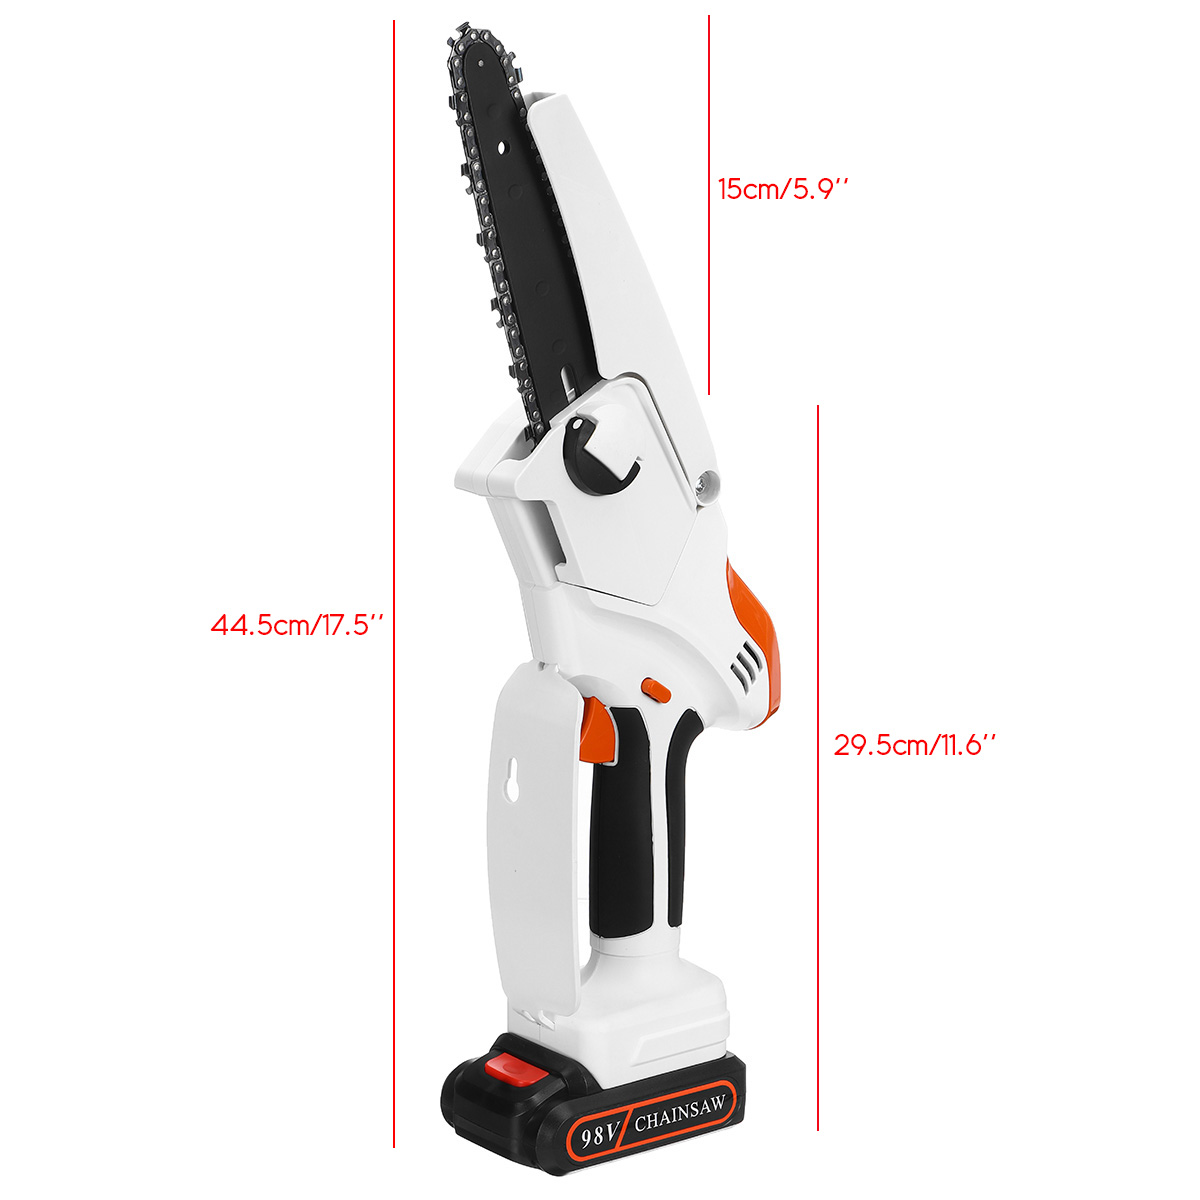 98VF-6Inch-Cordless-Electric-Chain-Saw-Rechargeable-Wood-Cutter-Woodworking-Tool-W-None-or1or2-Batte-1879171-9